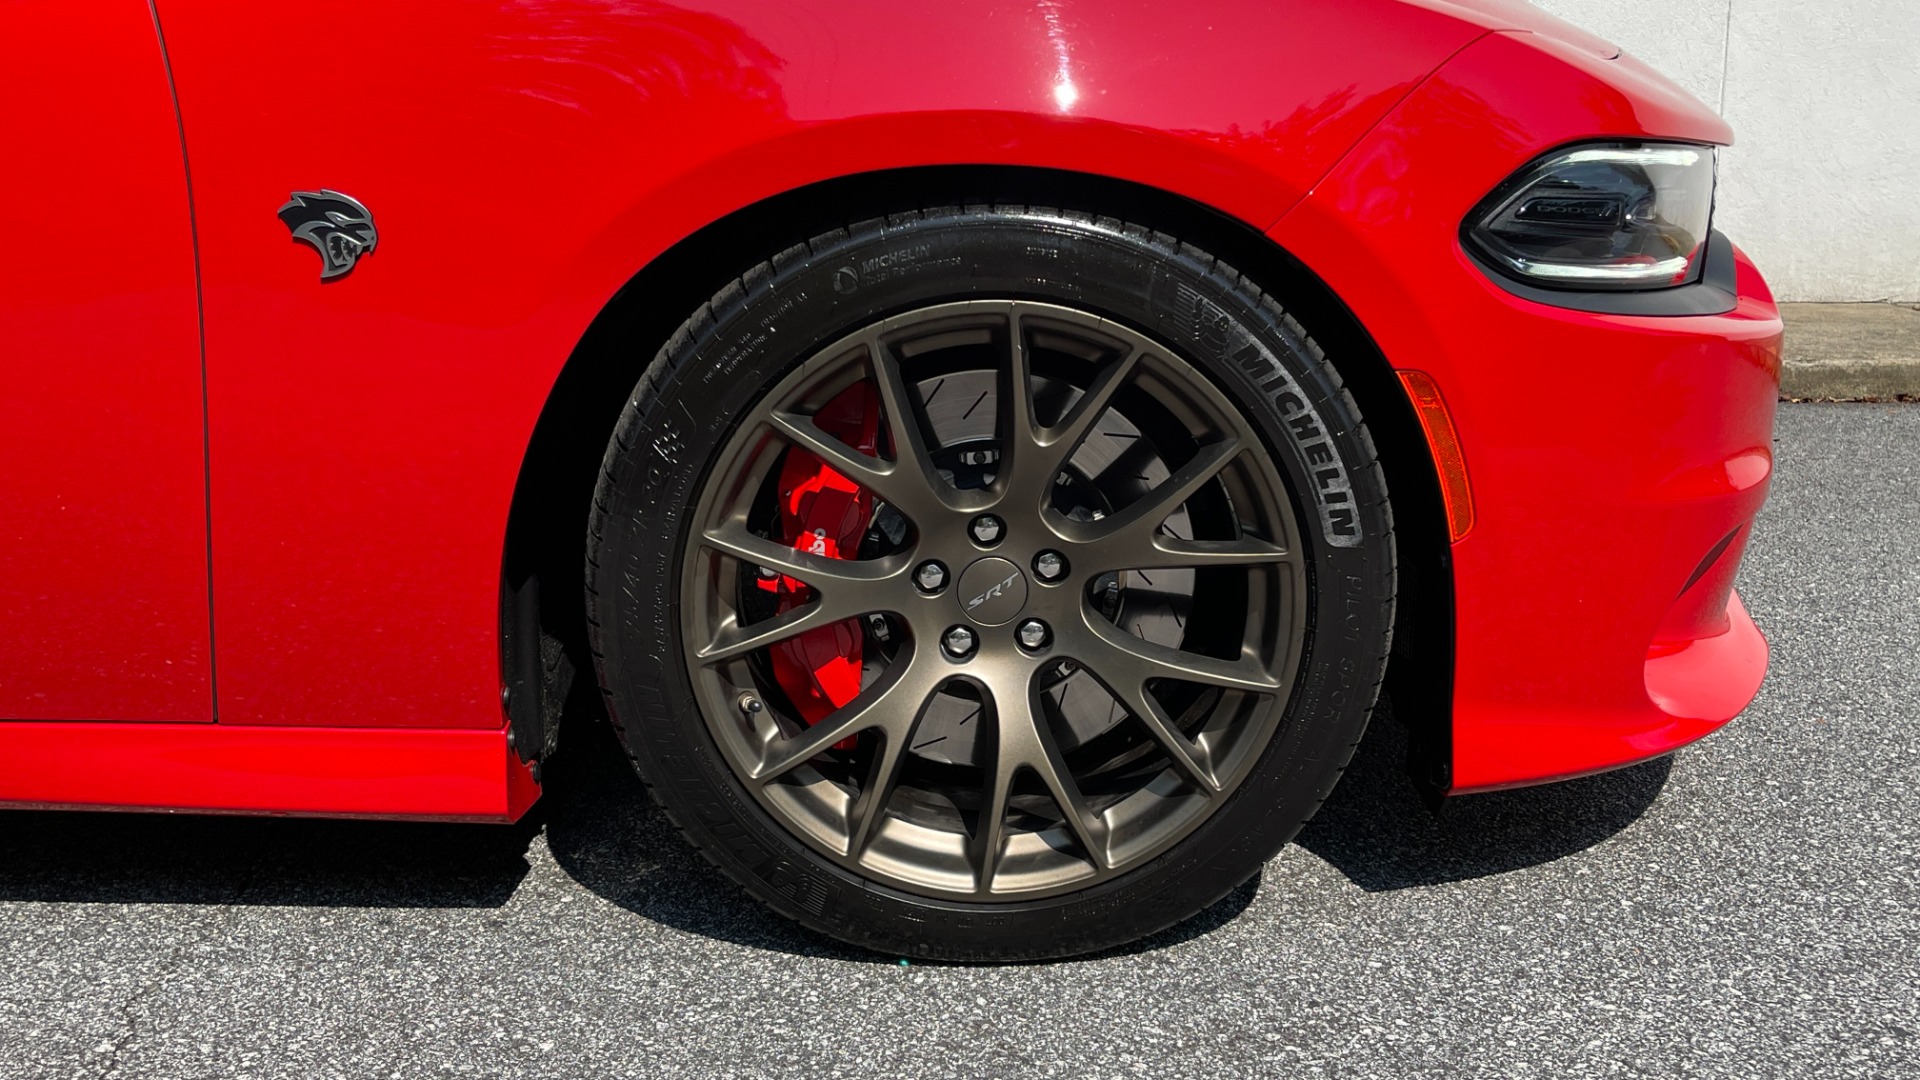 Used 2017 Dodge Charger SRT HELLCAT / HEMI SUPERCHARGED / 20IN WHEELS / SUNROOF / RED SEAT BELTS for sale $63,750 at Formula Imports in Charlotte NC 28227 44